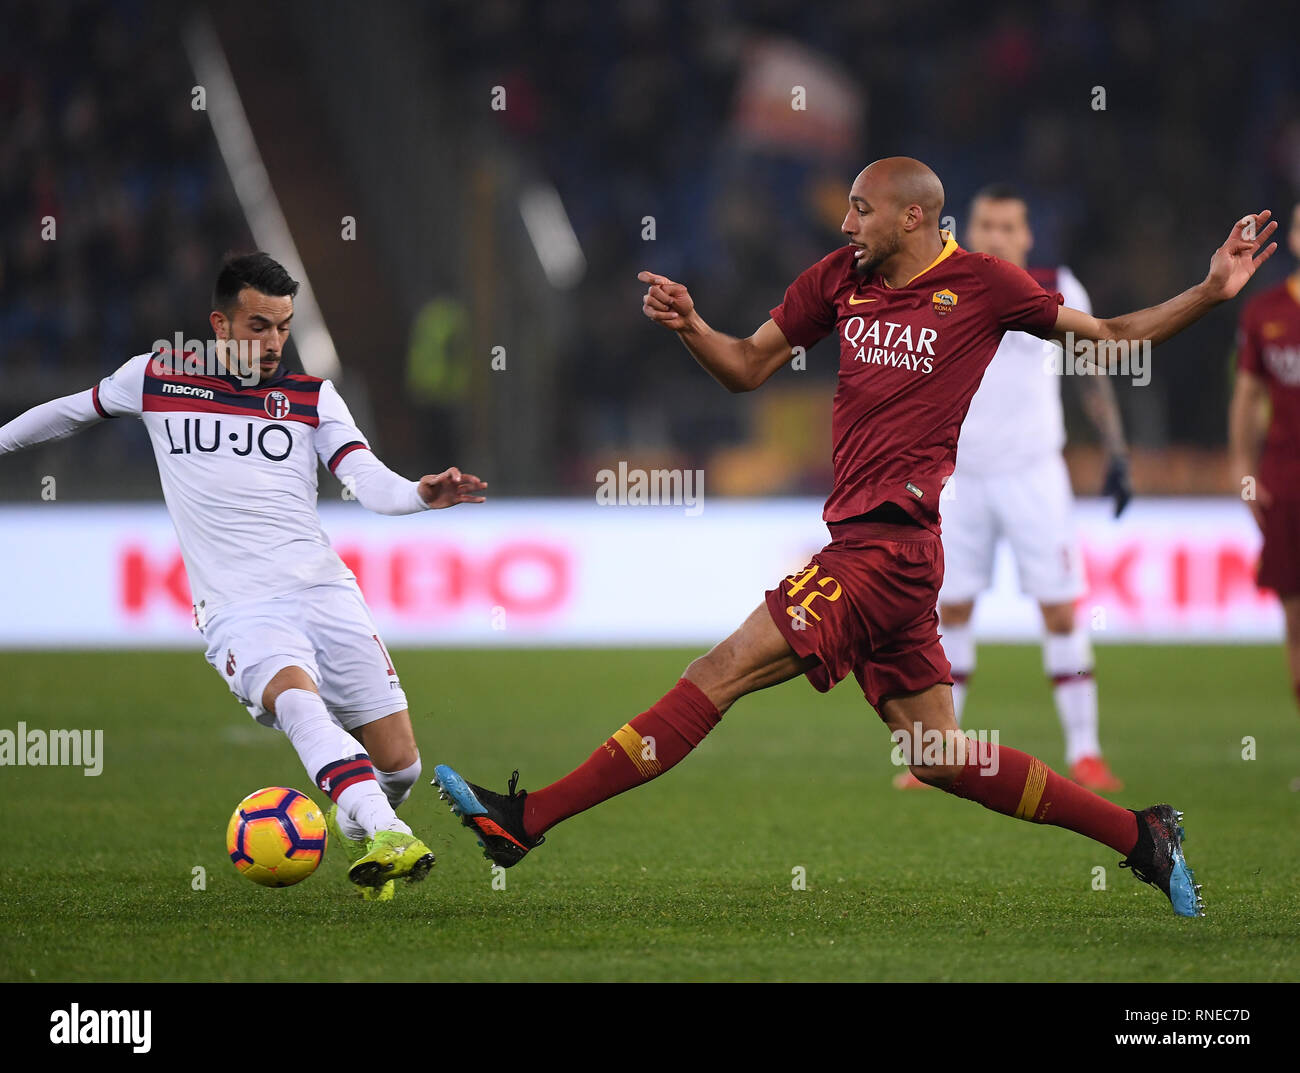 Rome, Italy. 18th Feb, 2019. Roma's Steven Nzonzi (R) vies with Bologna's Nicola Sansone during a Serie A soccer match between AS Roma and Bologna in Rome, Italy, Feb. 18, 2019. Rome won 2-1. Credit: Alberto Lingria/Xinhua/Alamy Live News Stock Photo